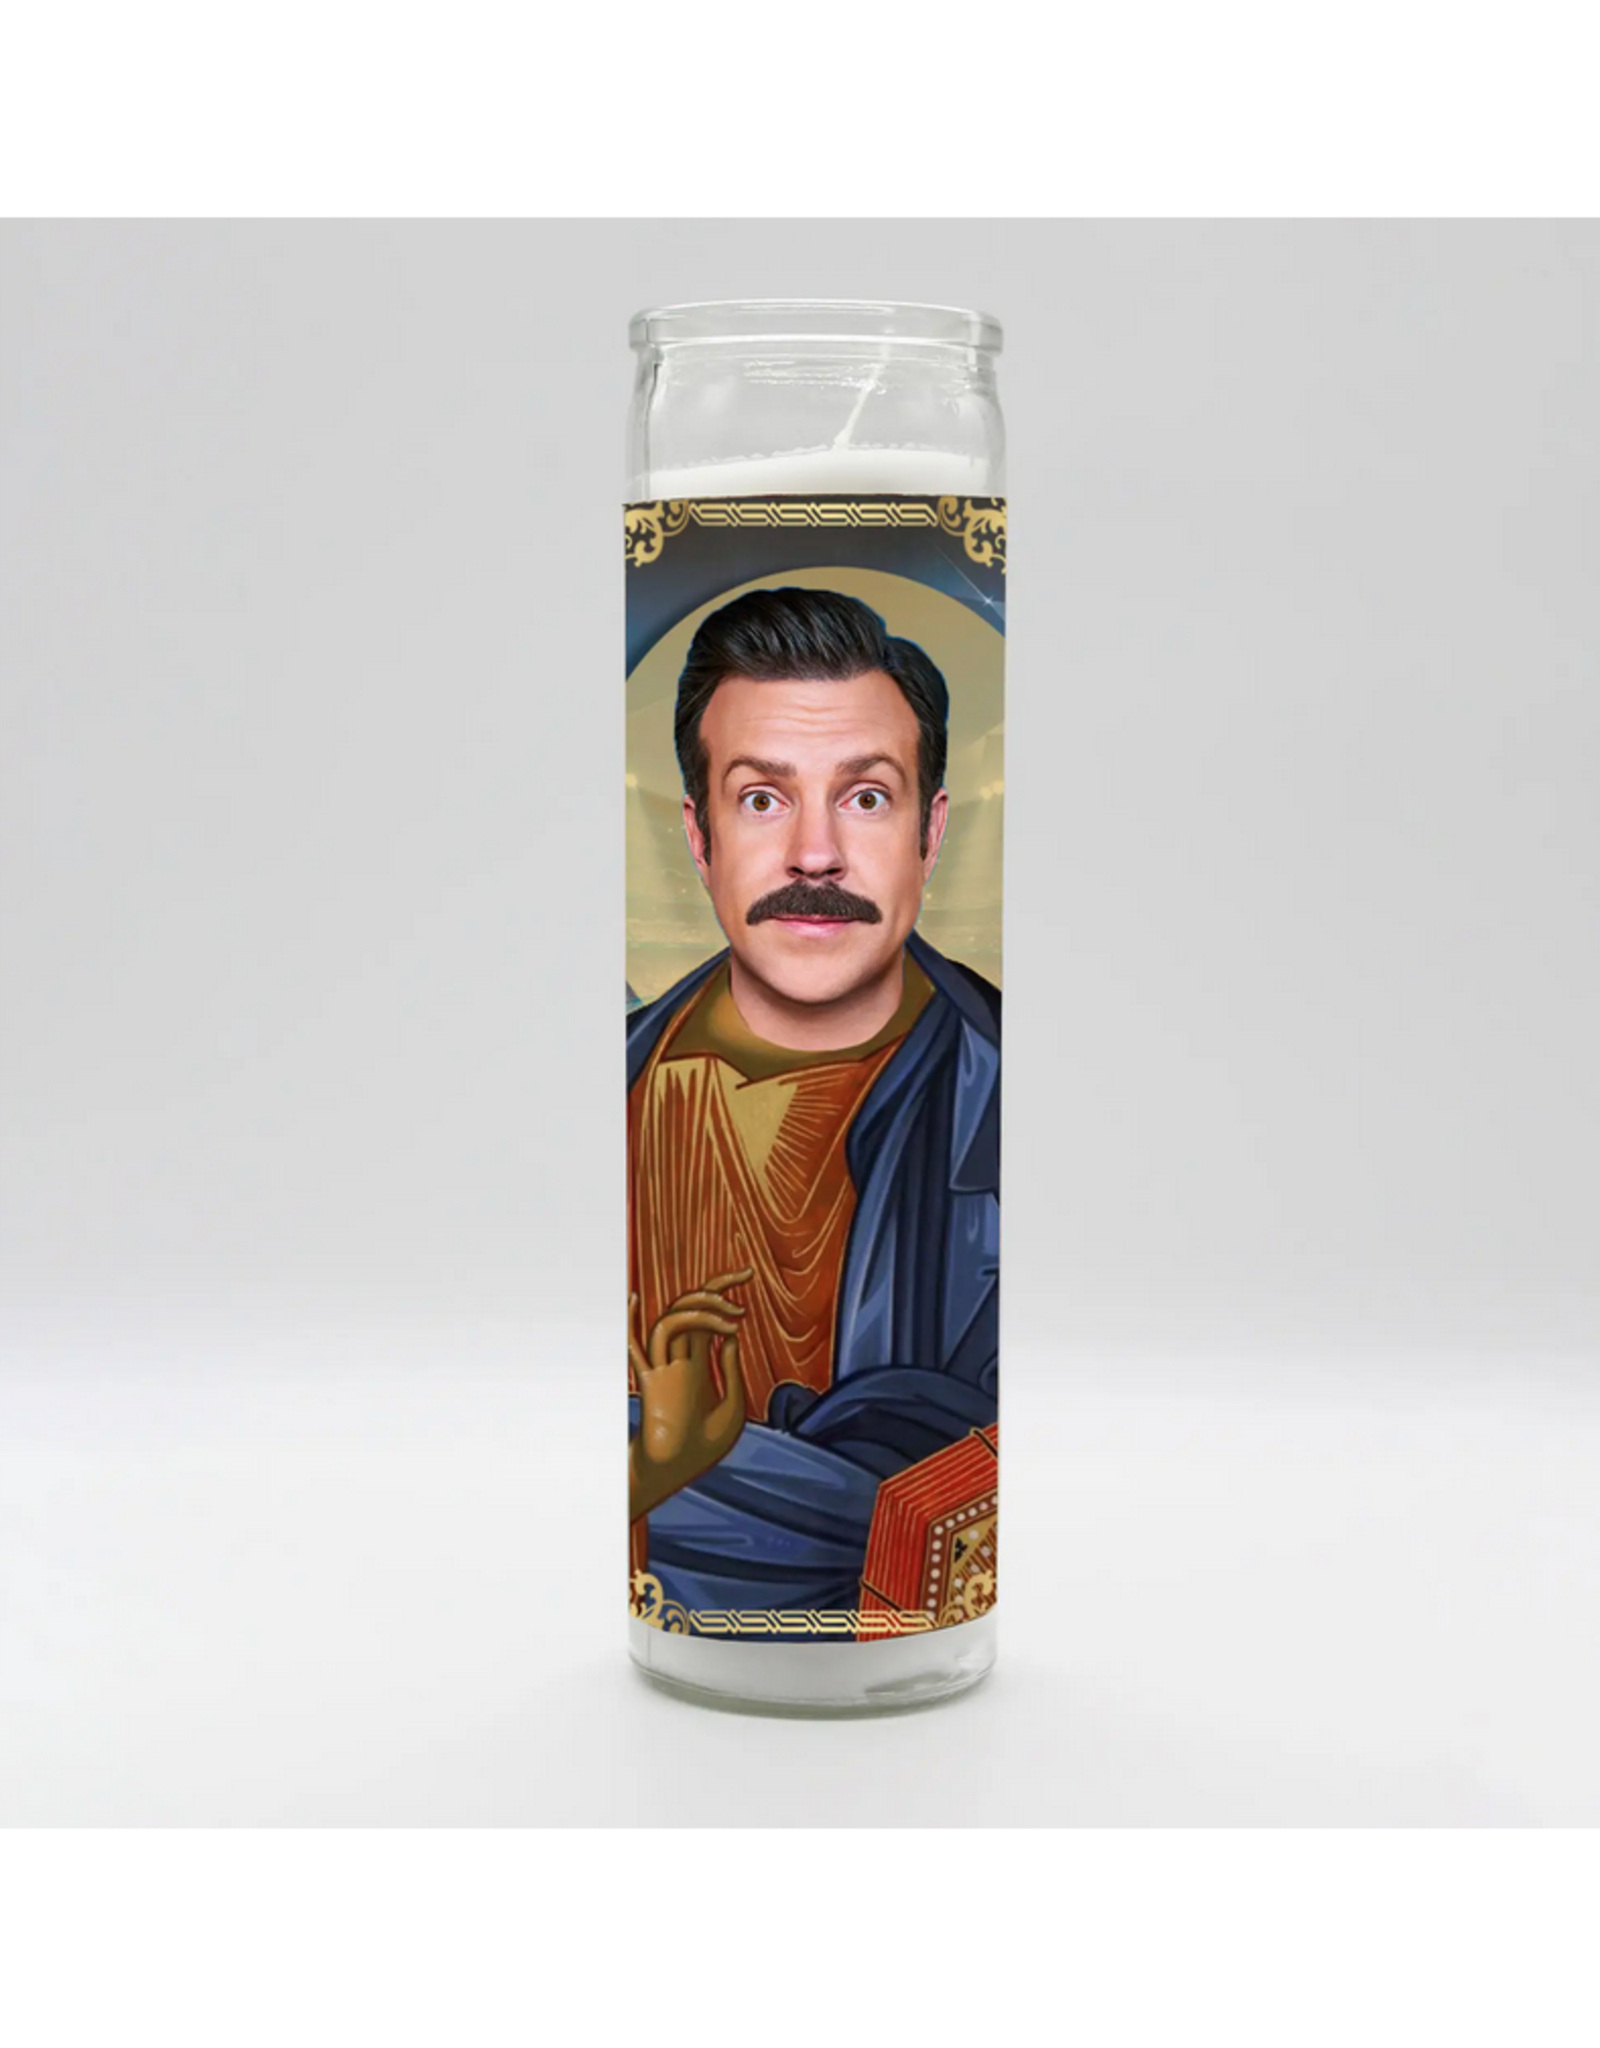 Ted Lasso Prayer Candle